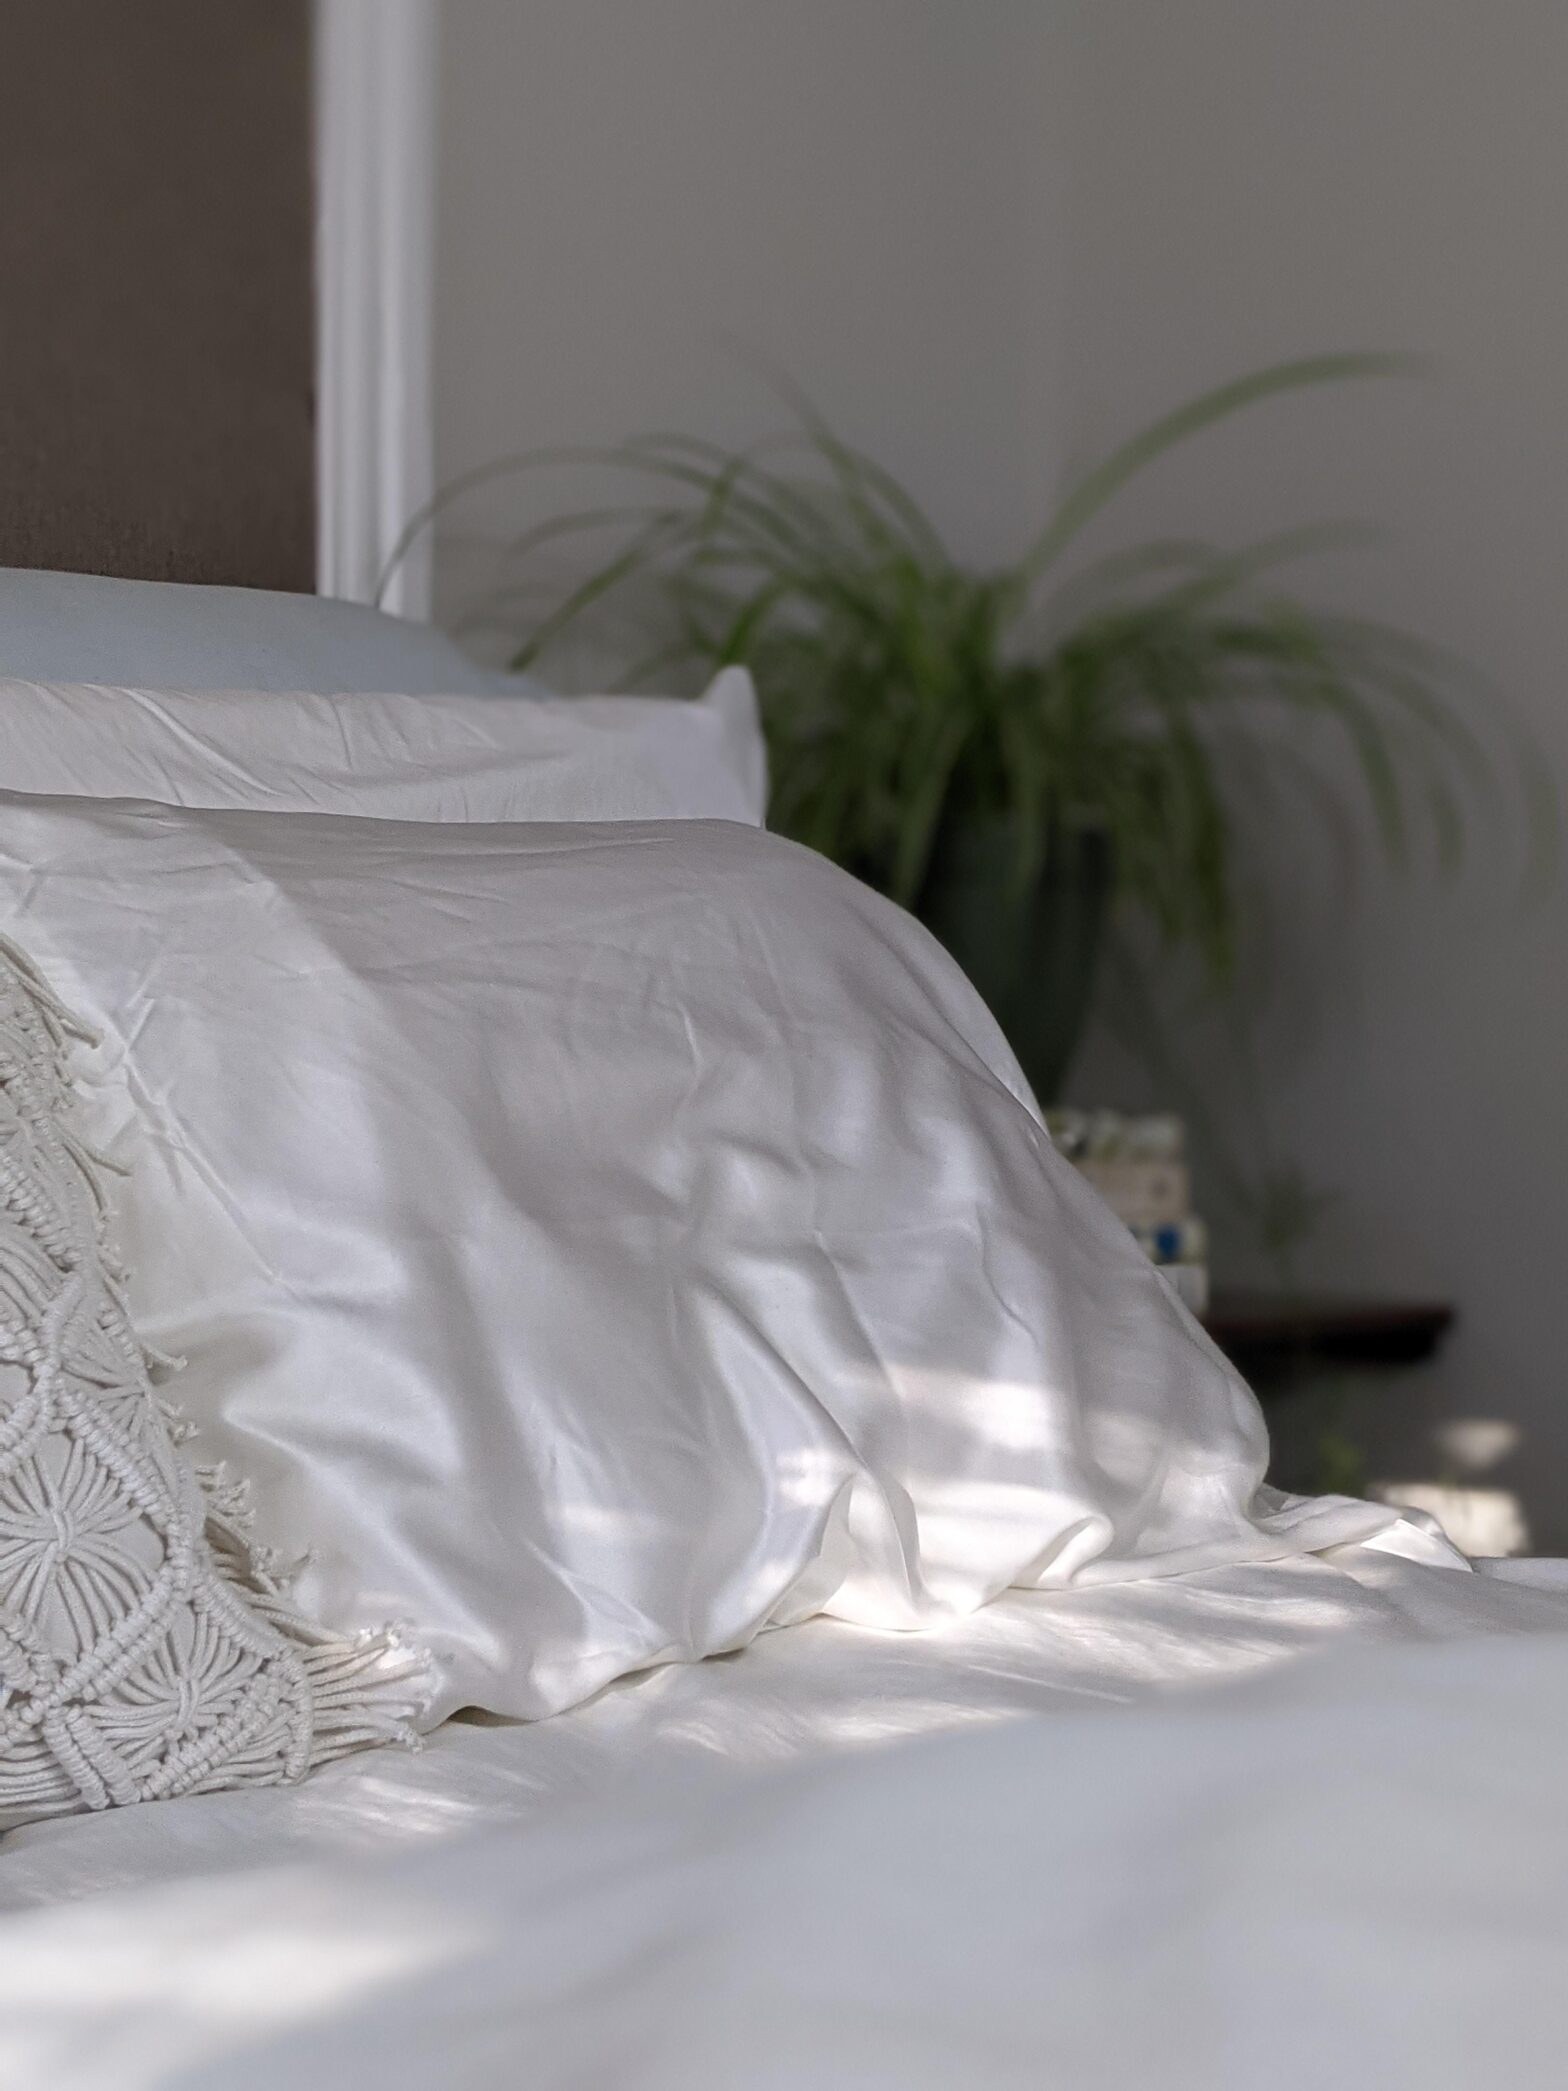 The Best Organic Sheets & Blankets for Your Linen Closet